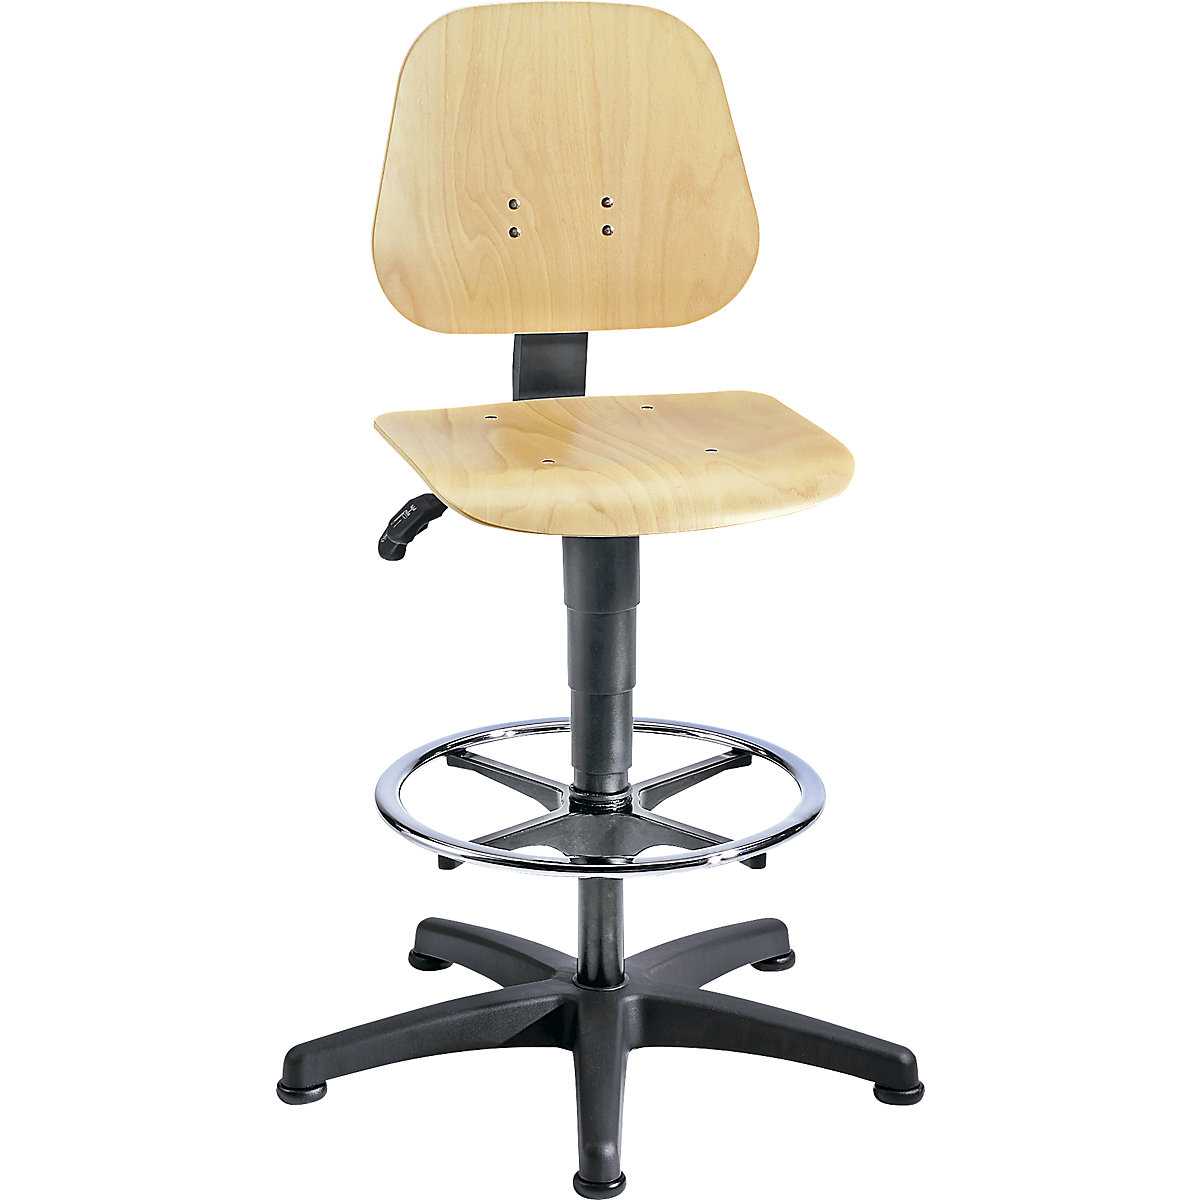 Industrial swivel chair – bimos, with gas lift height adjustment, beech plywood, with floor glides and foot ring-13